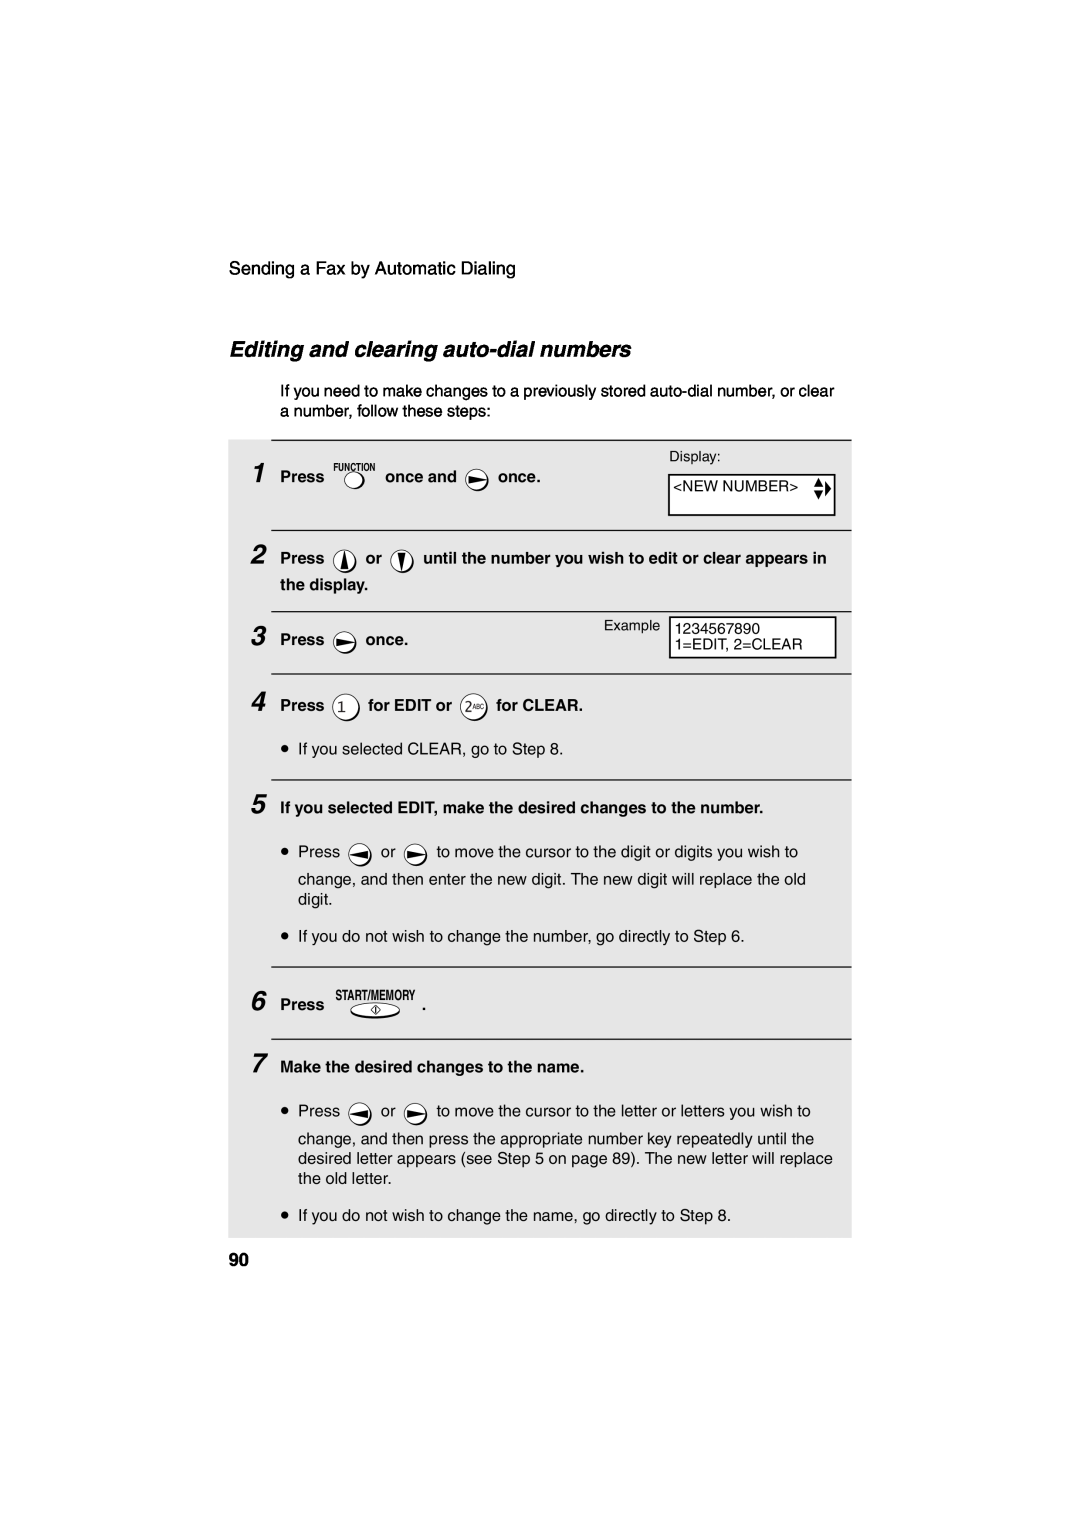 Sharp UX-CD600 operation manual Editing and clearing auto-dial numbers, Sending a Fax by Automatic Dialing 